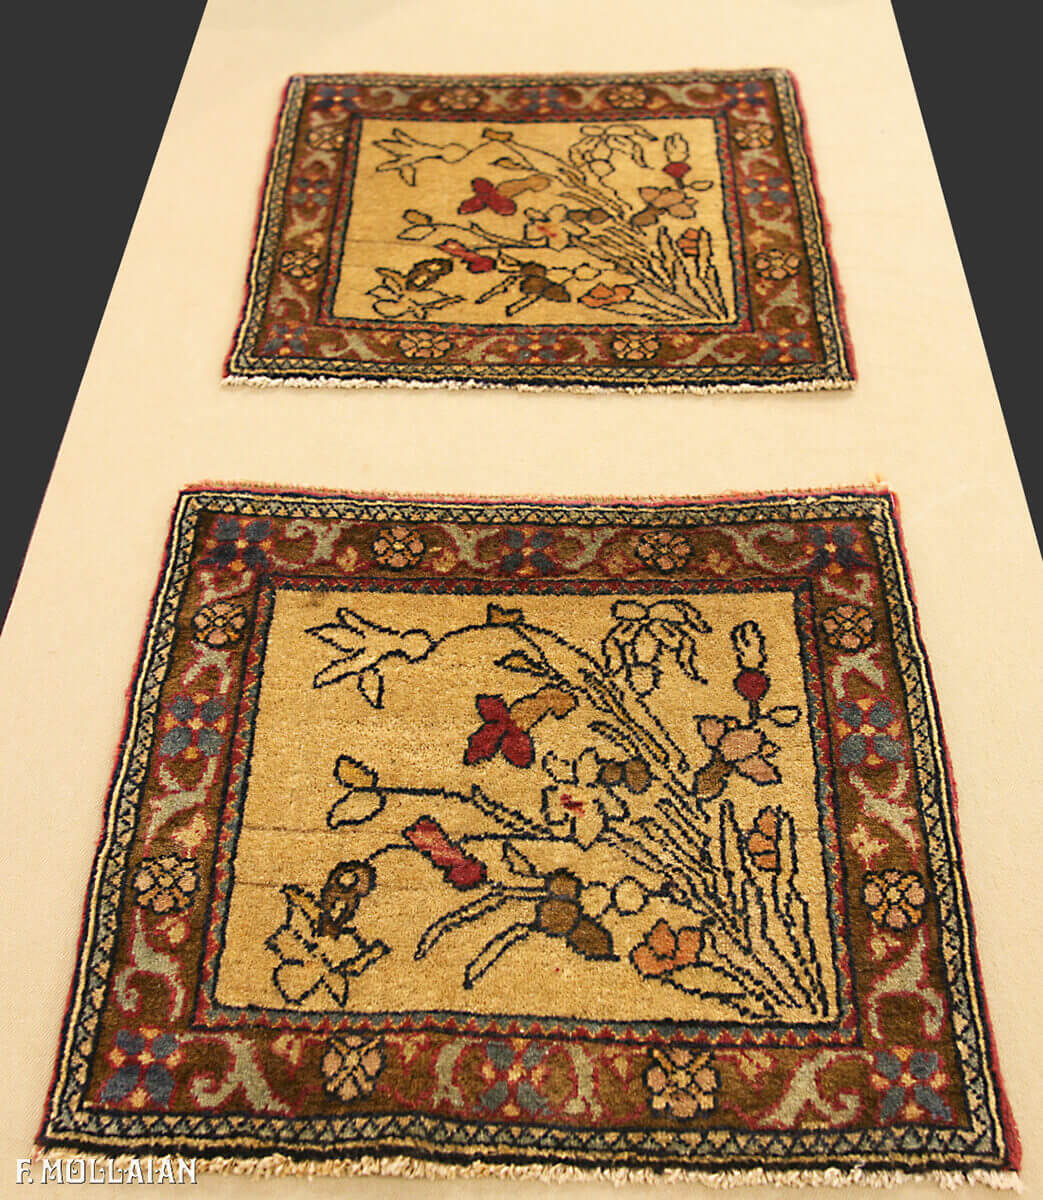 A Very Small Antique Persian Pair of Isfahan Rug n°:38442365-74874890